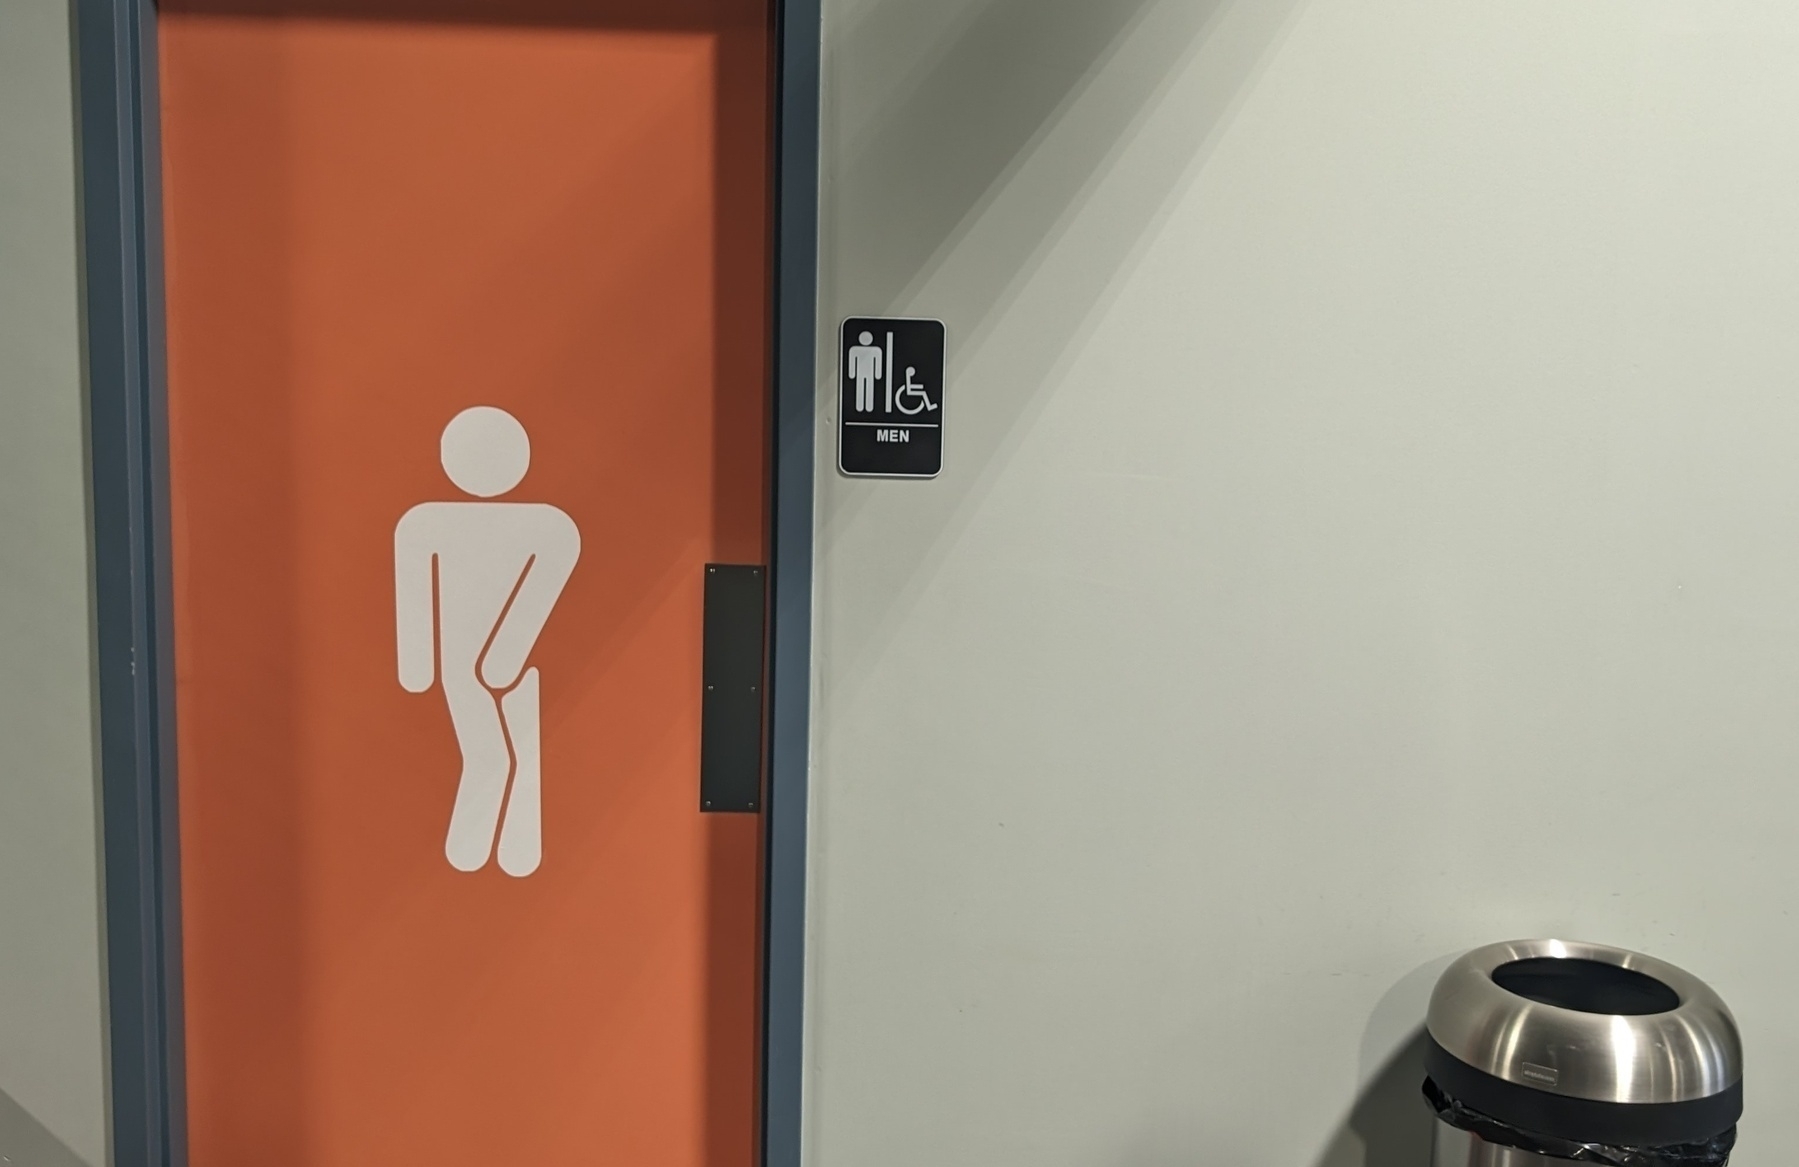 Photo of a restroom door. The door is orange in color, a stark contrast to the paler white color of the wall. Featured on the door is a figure that indicates what could be referred to as a youngster doing the "gotta potty" dance.